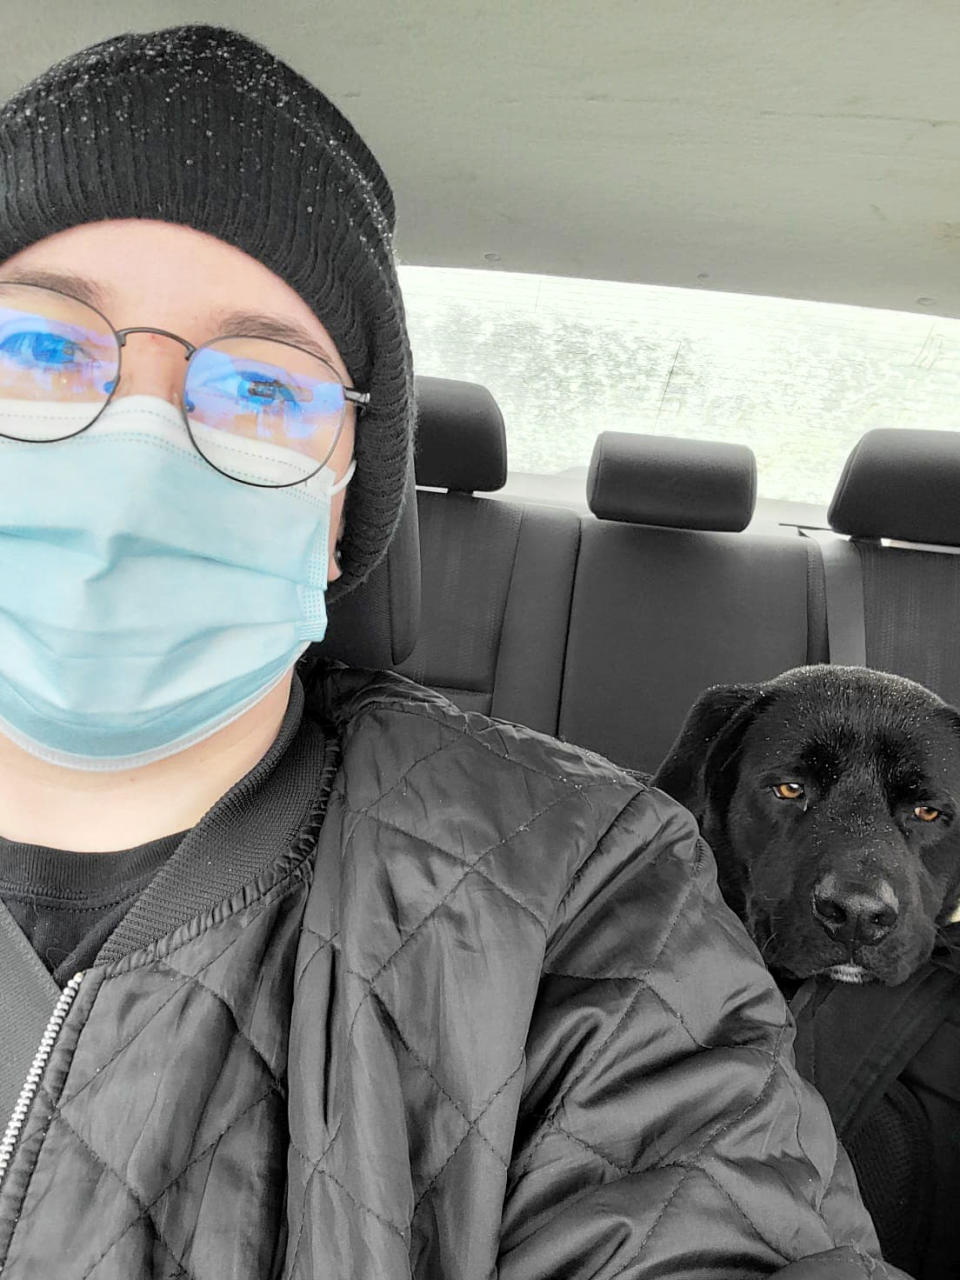 Image: Kristin Salinas and Taco in her car after she found him wandering the street (Courtesy of Kristin Salinas-Labrador)